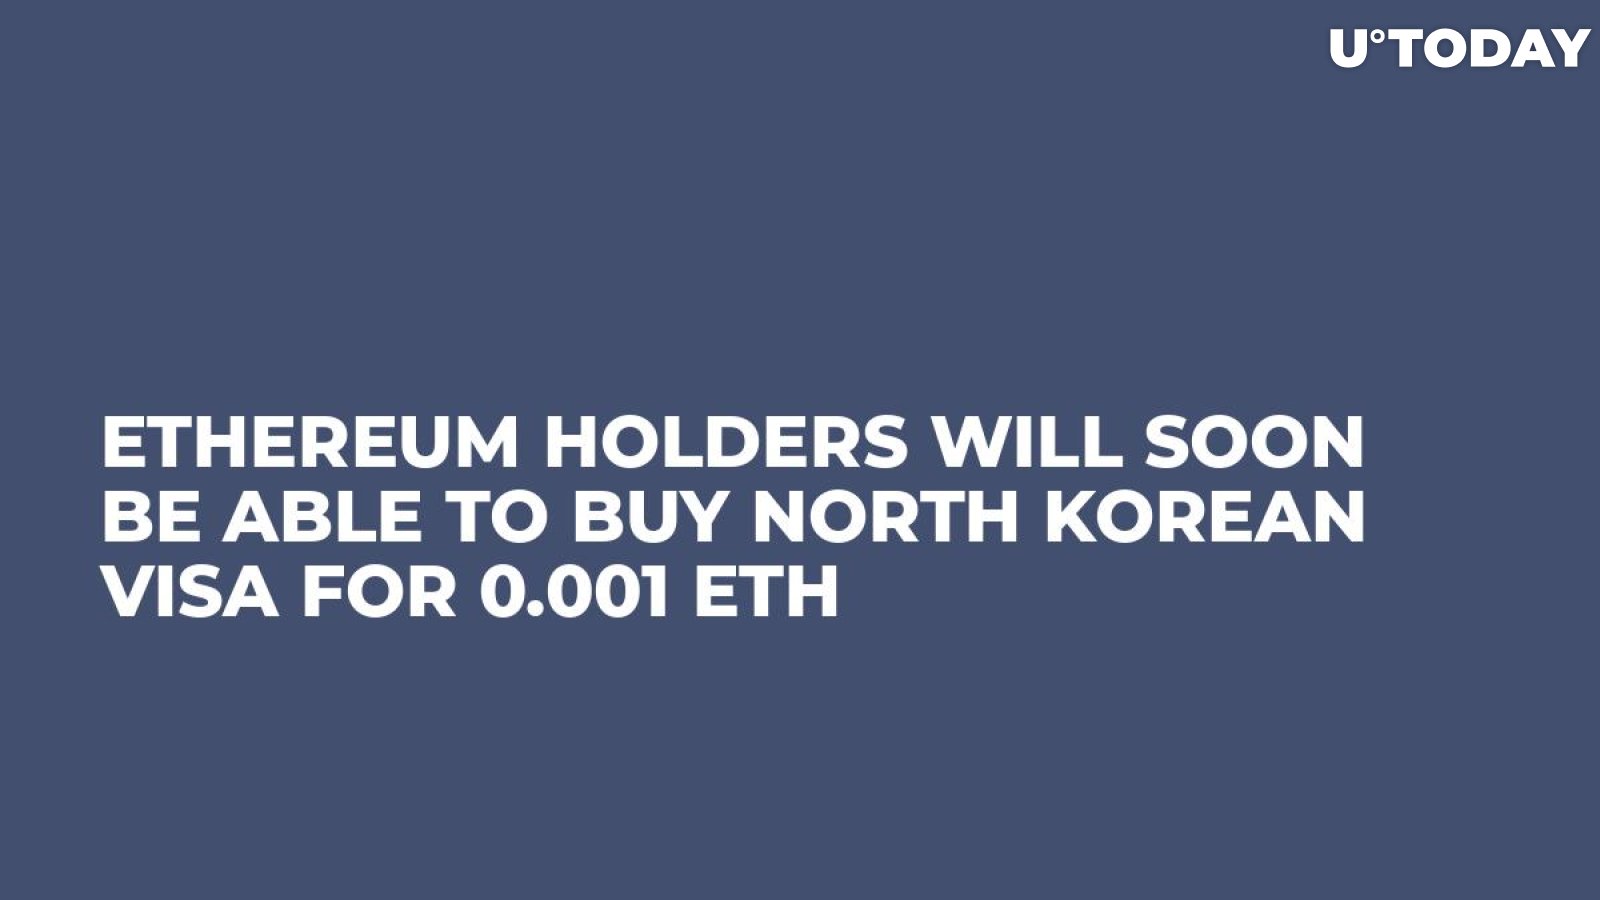 Ethereum Holders Will Soon Be Able to Buy North Korean Visa for 0.001 ETH 